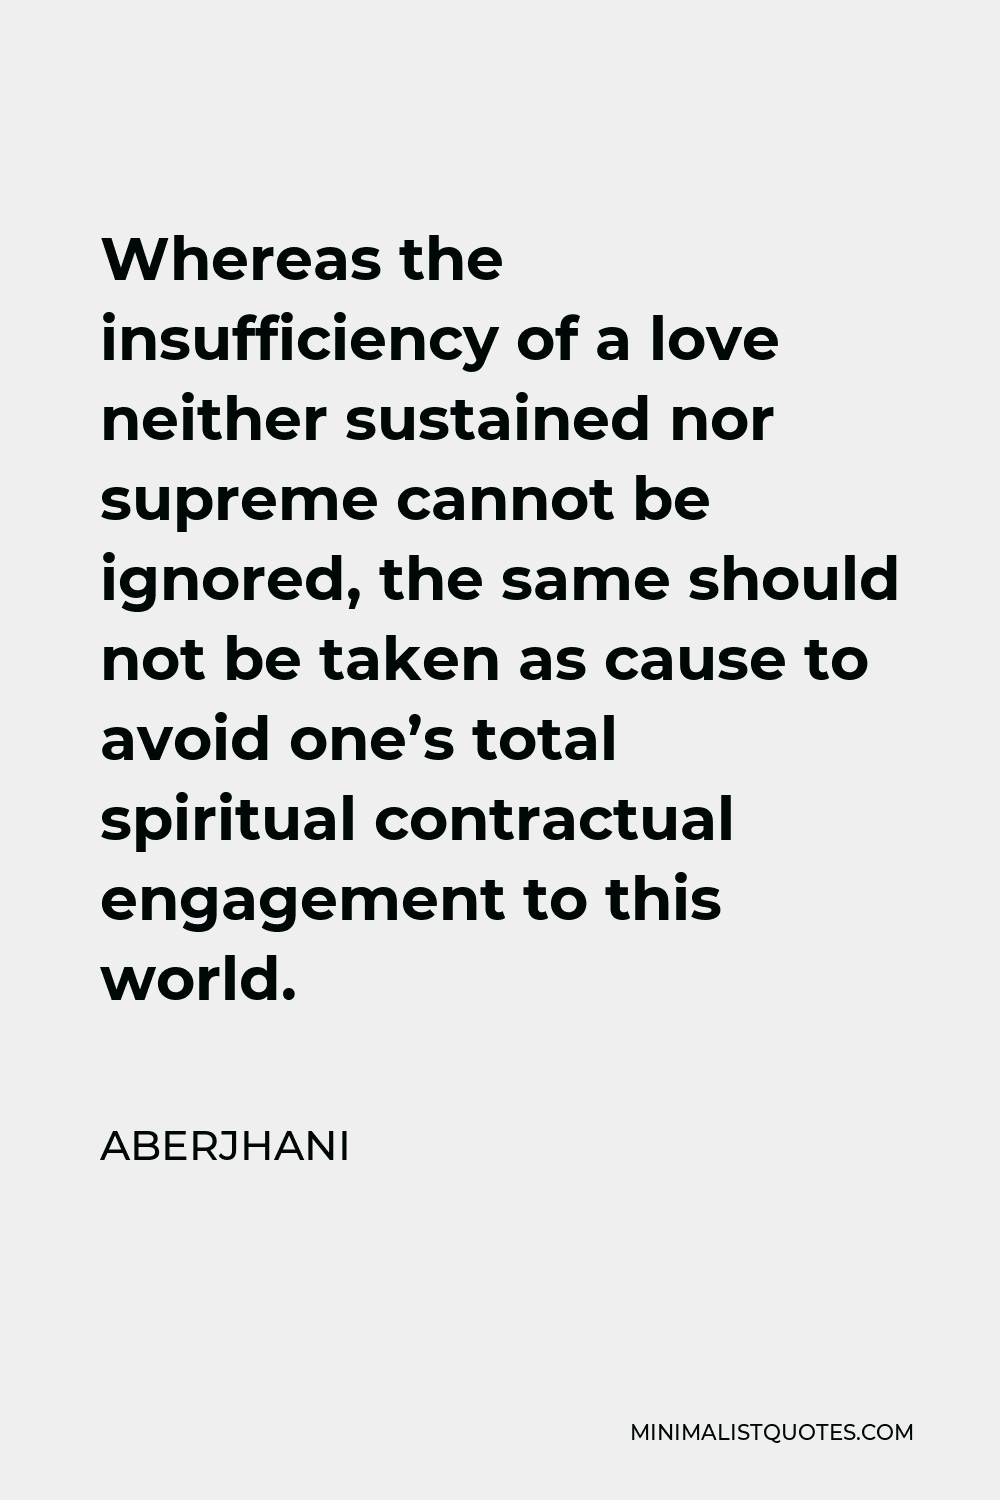 Aberjhani Quote - Whereas the insufficiency of a love neither sustained nor supreme cannot be ignored, the same should not be taken as cause to avoid one’s total spiritual contractual engagement to this world.